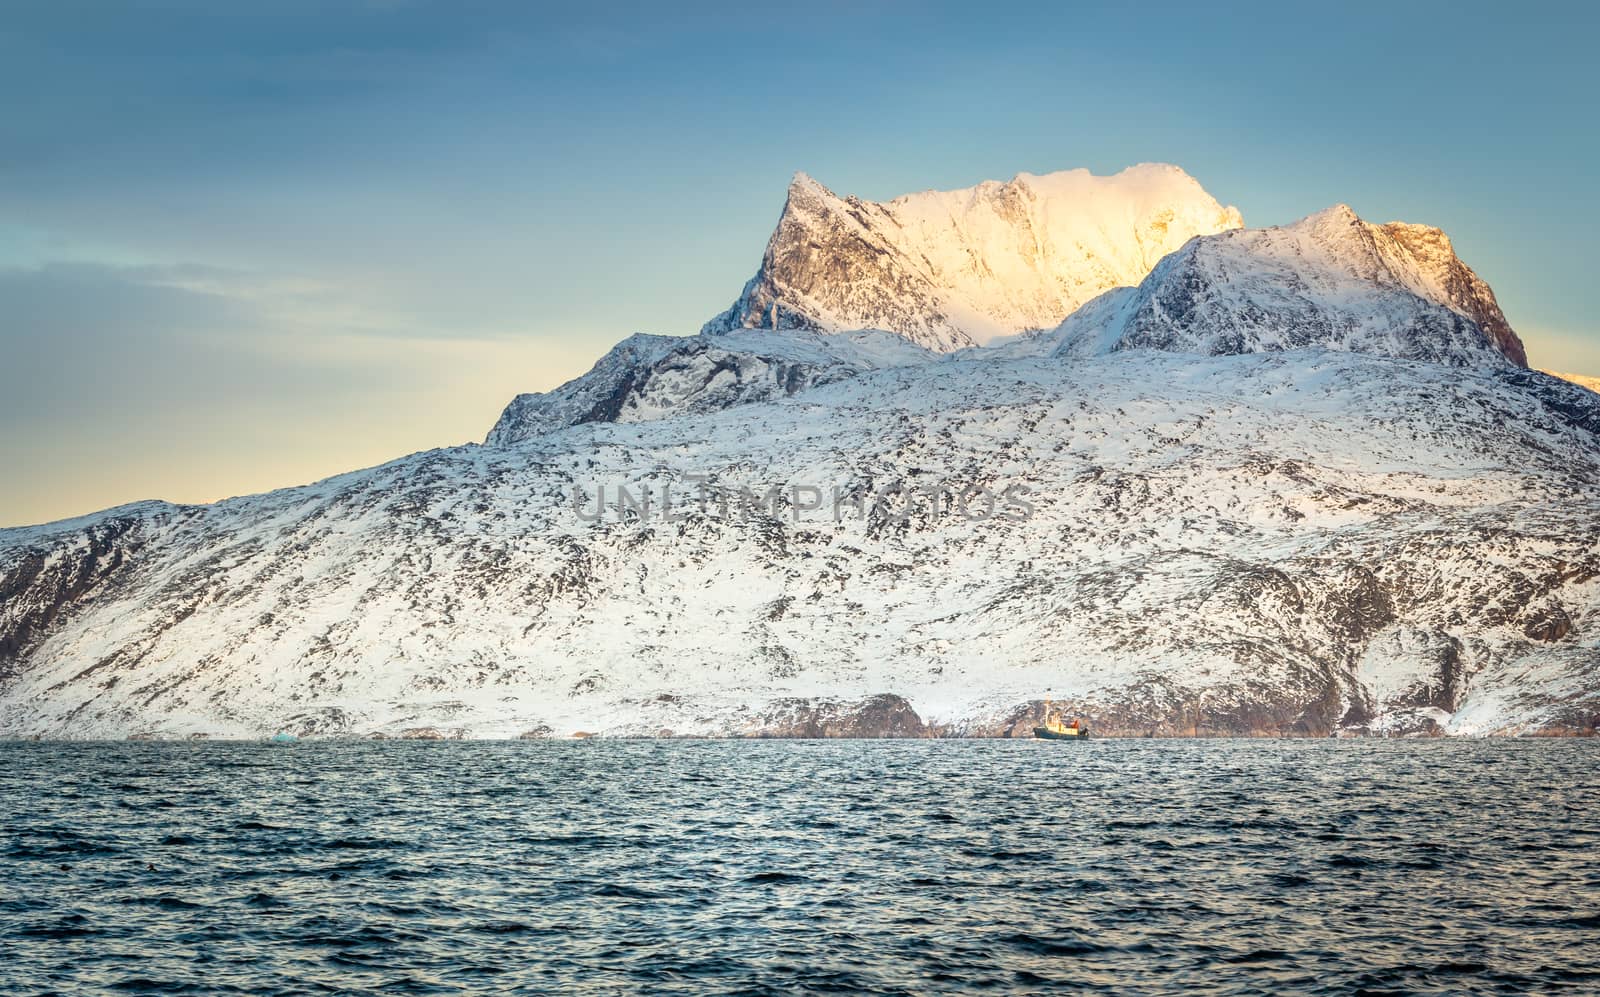 Huge Sermitsiaq mountain covered in snow with blue sea and small fishing boat, nearby Nuuk city, Greenland